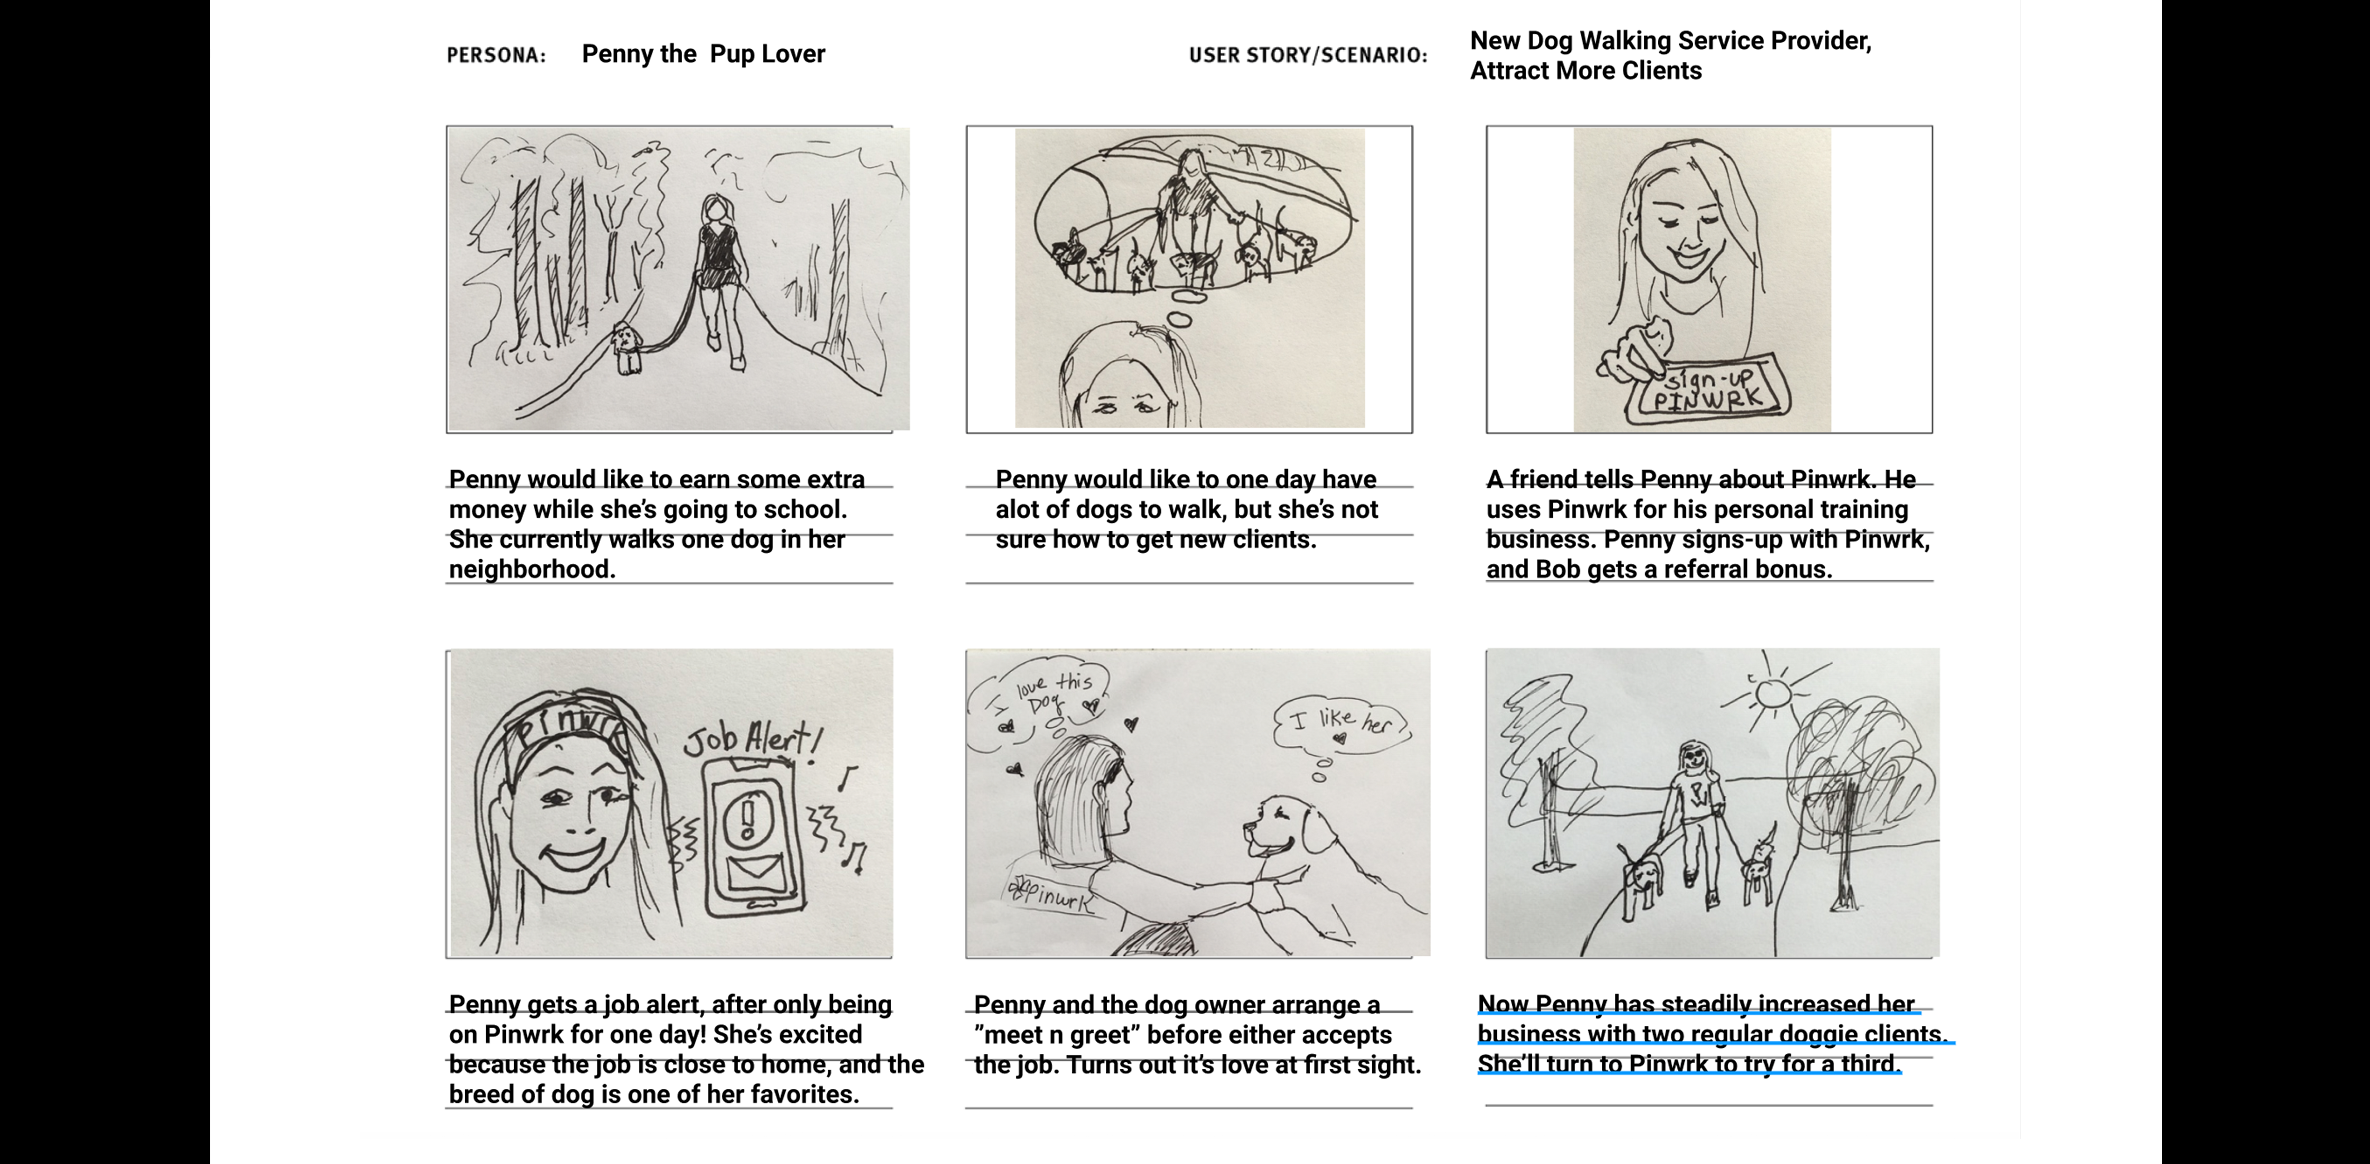 Storyboard of Penny the Pup Lover looking to walk more dogs.